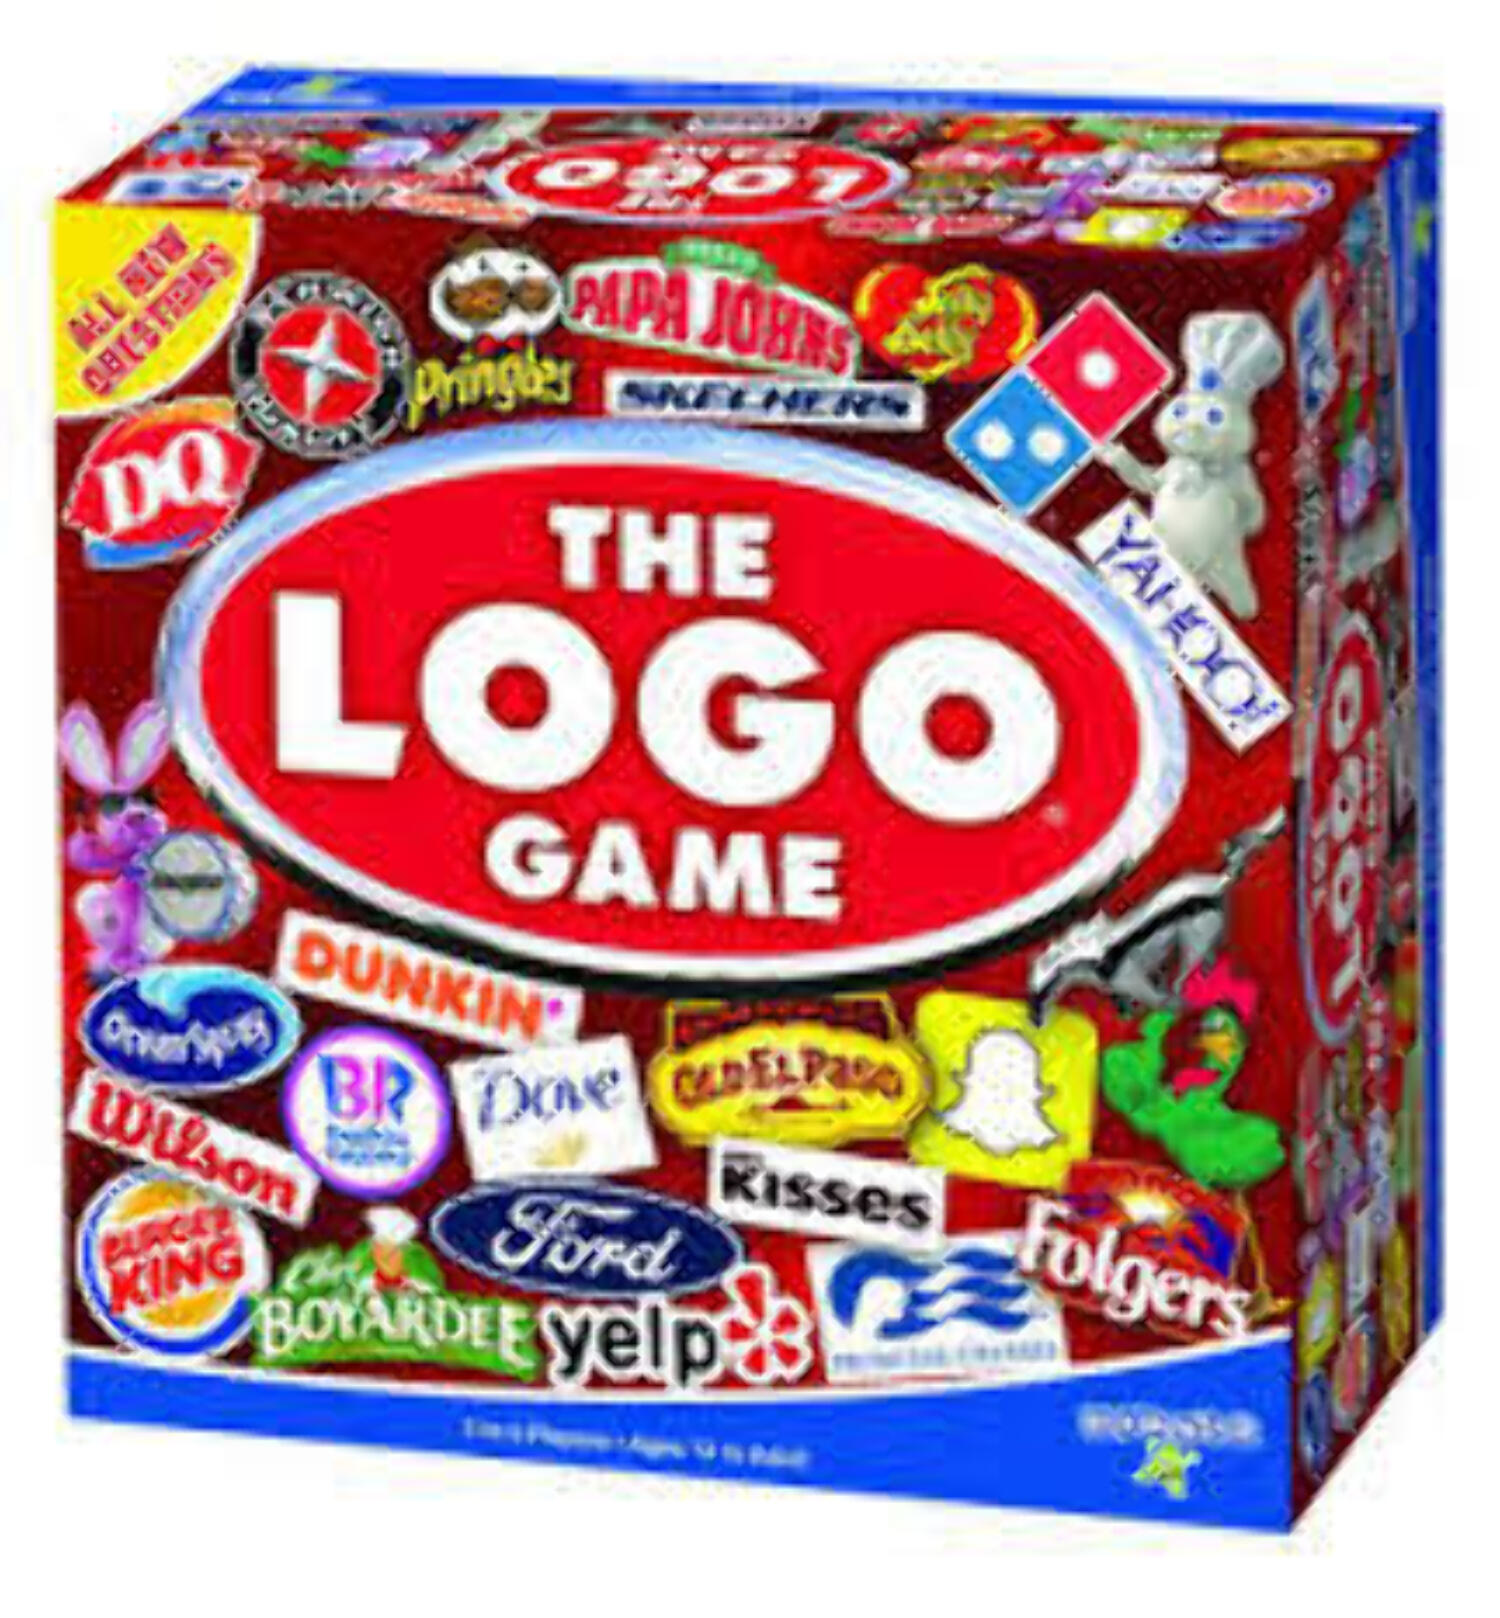 The Logo Game Board Game, Card Game, Kids Game, Family Game Adult Game - image 1 of 2